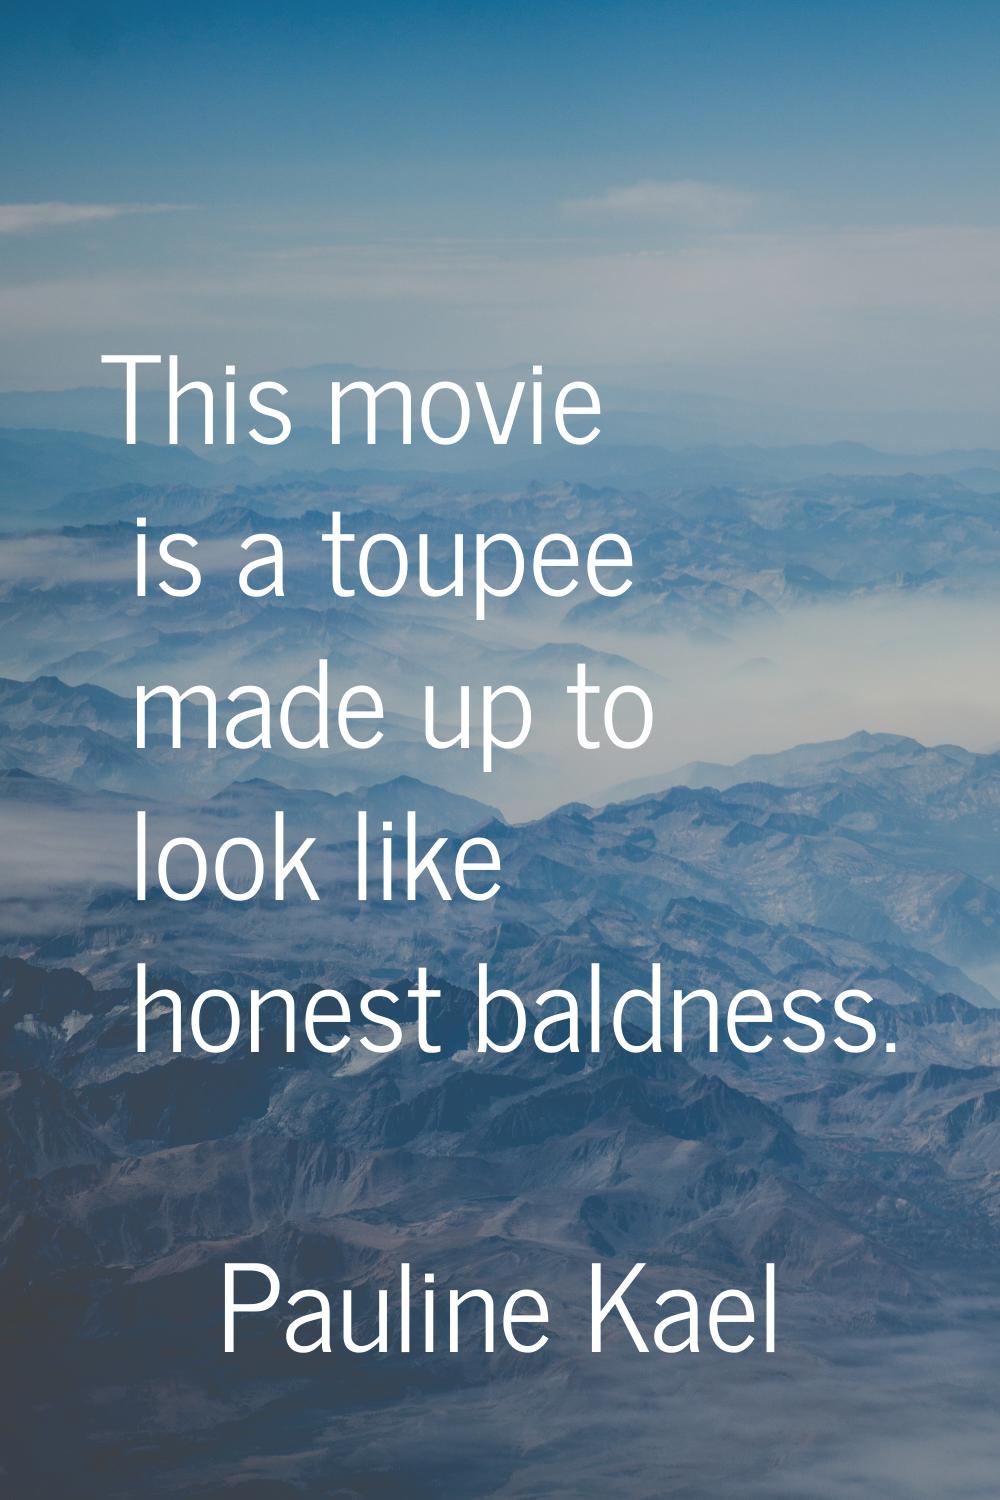 This movie is a toupee made up to look like honest baldness.